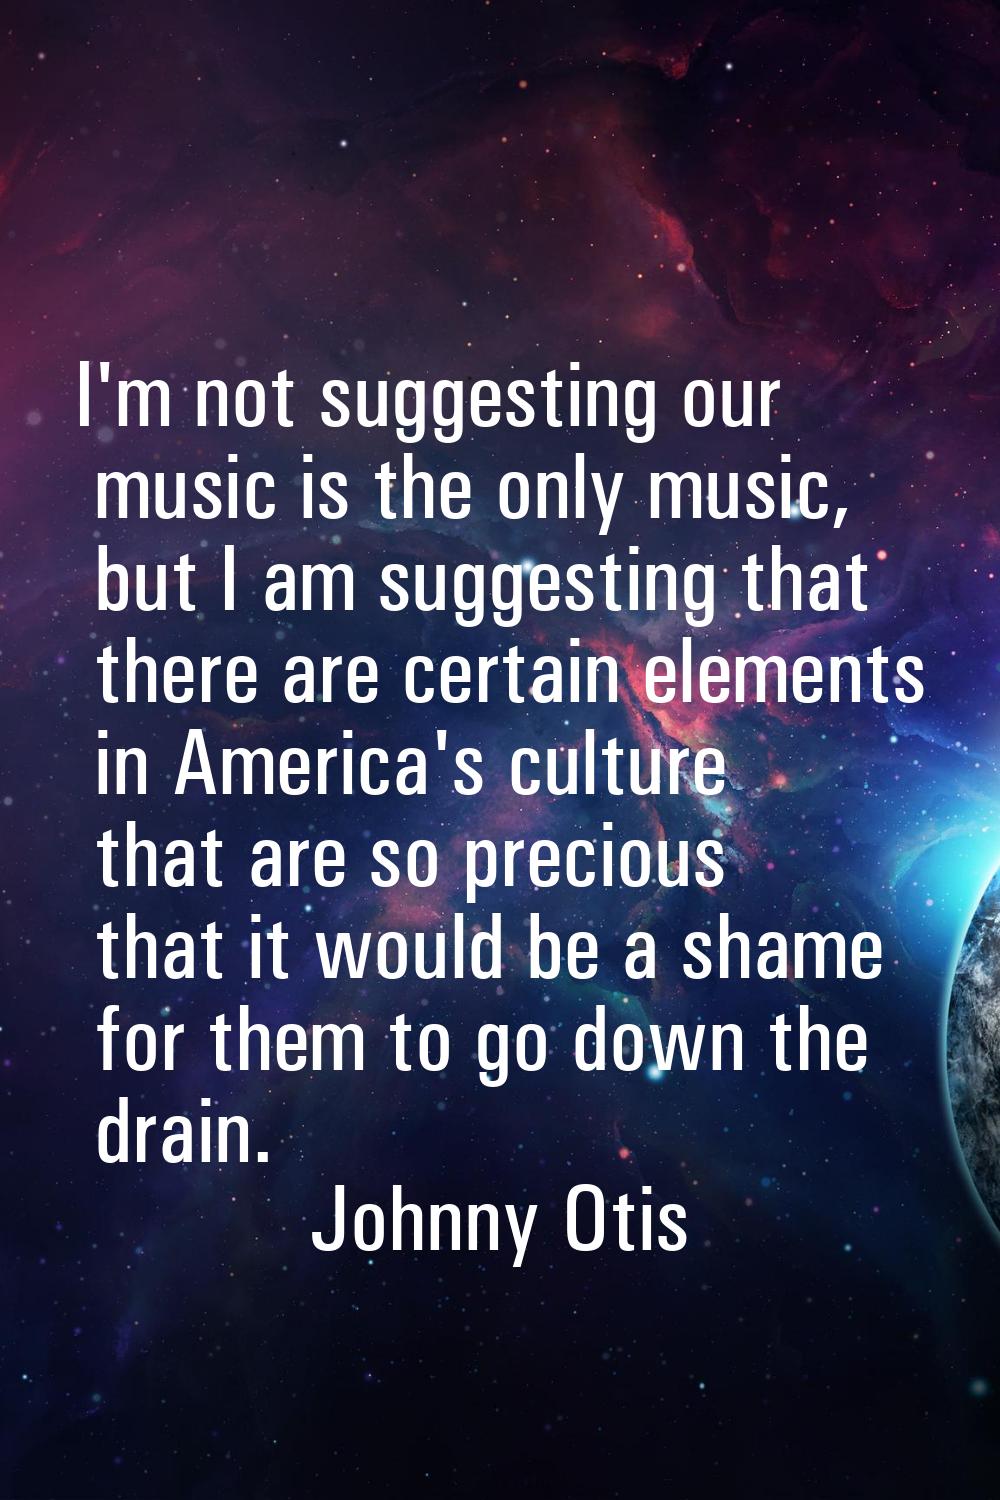 I'm not suggesting our music is the only music, but I am suggesting that there are certain elements